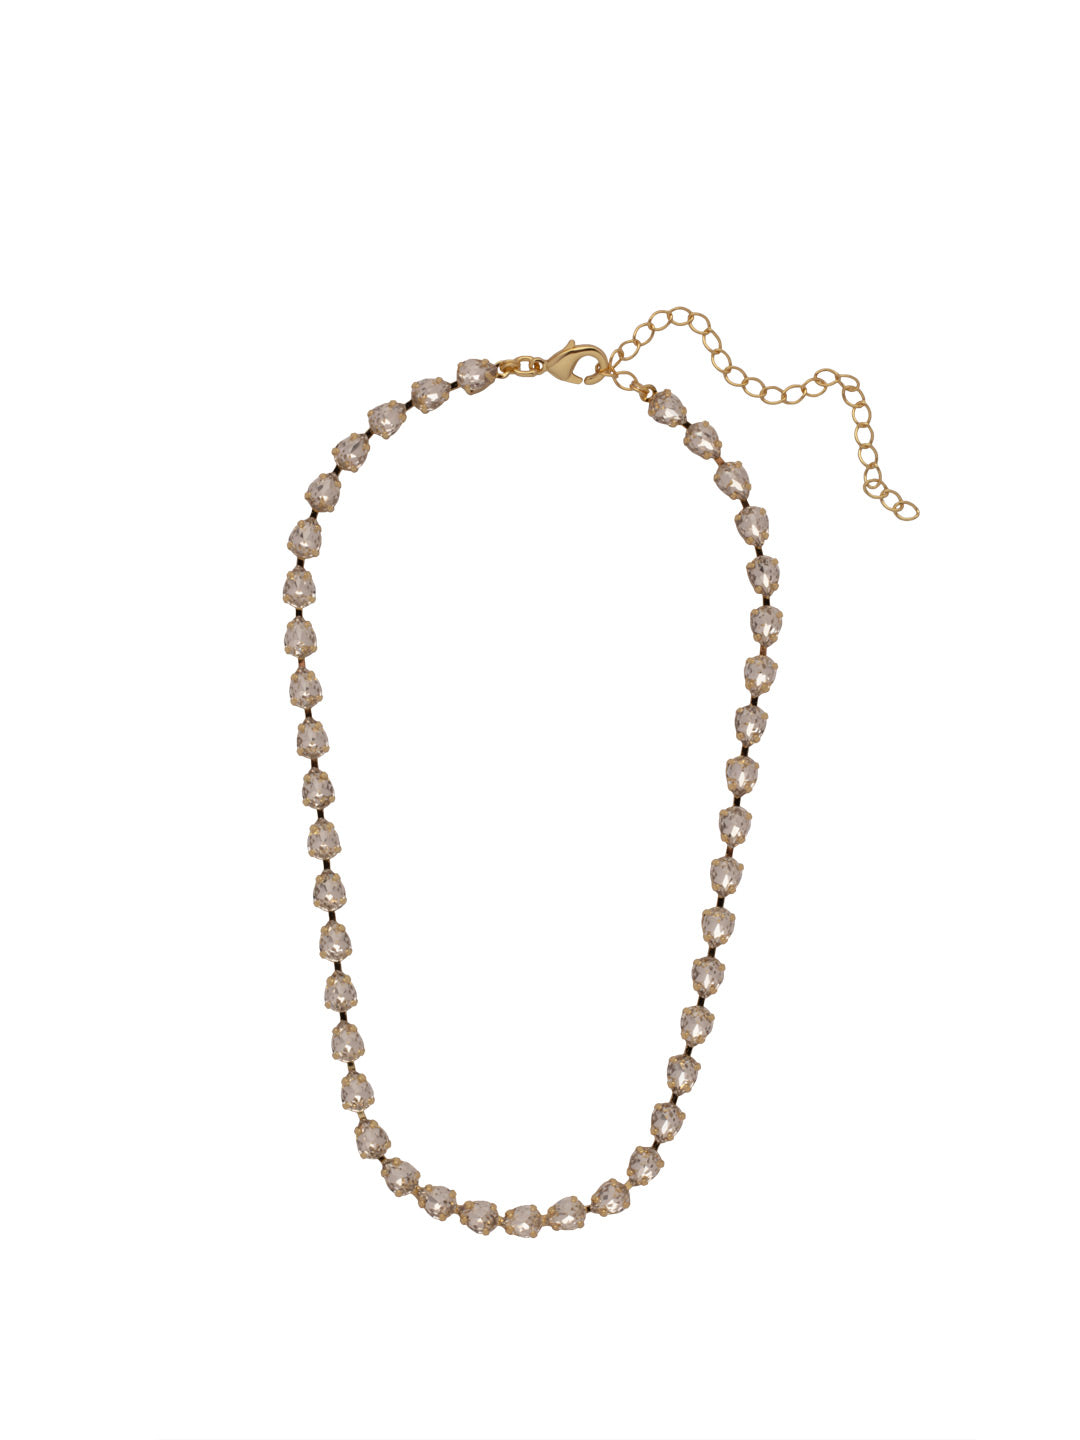 Perrie Tennis Necklace - 4NFJ17BGCRY - <p>The Perrie Tennis Necklace features a repeating line of pear cut crystals with an extension chain, secured with a lobster claw clasp. From Sorrelli's Crystal collection in our Bright Gold-tone finish.</p>